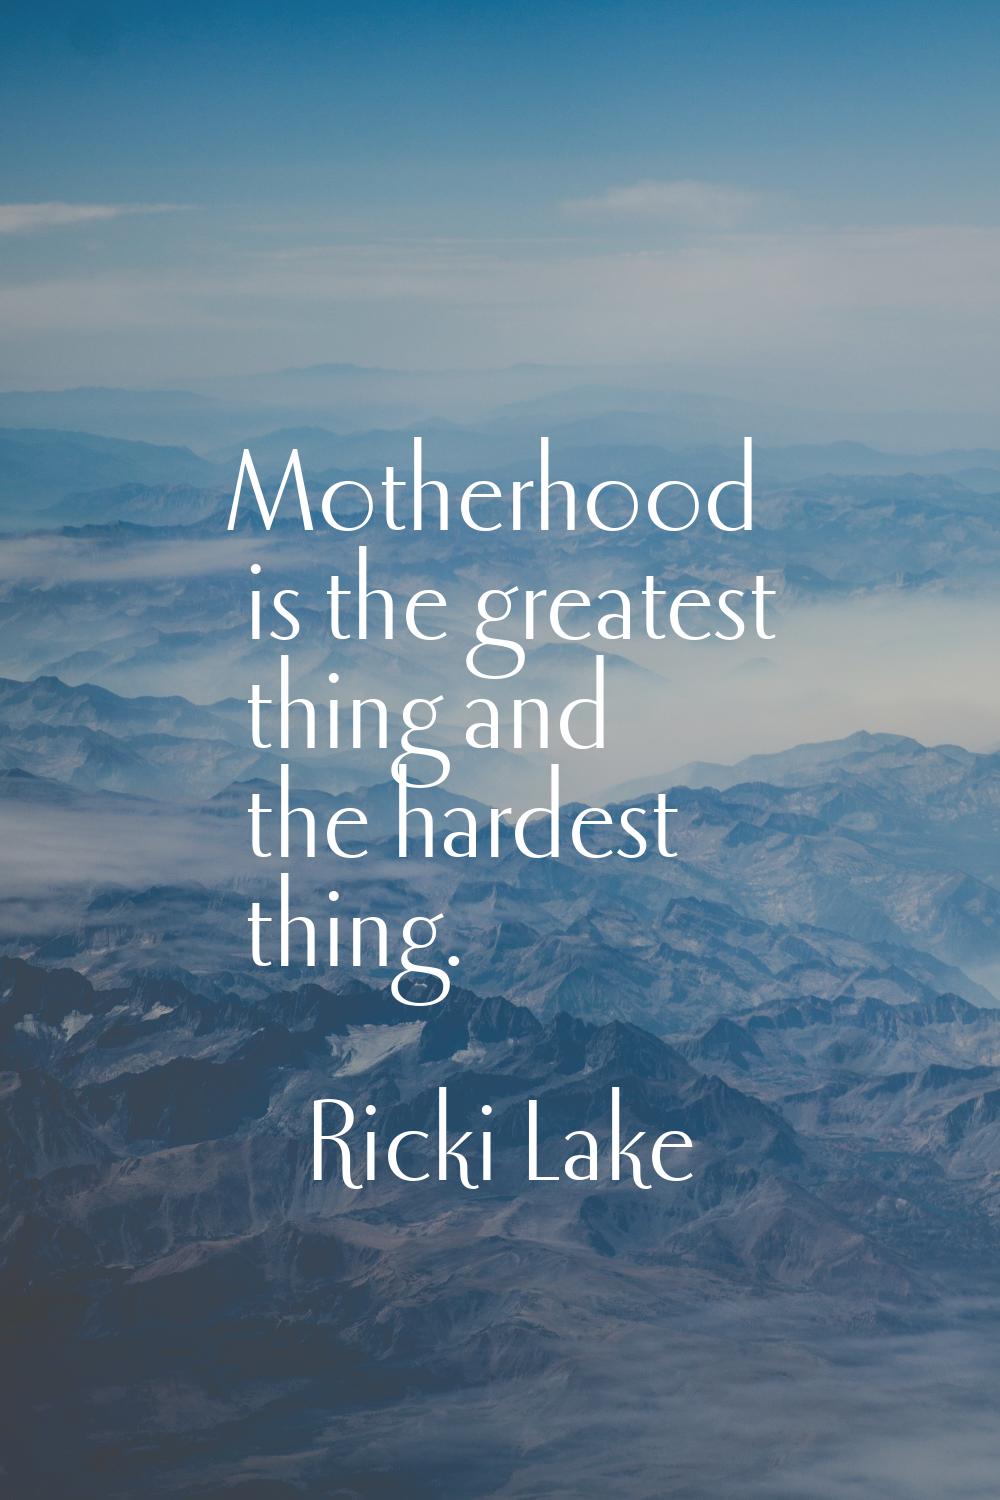 Motherhood is the greatest thing and the hardest thing.